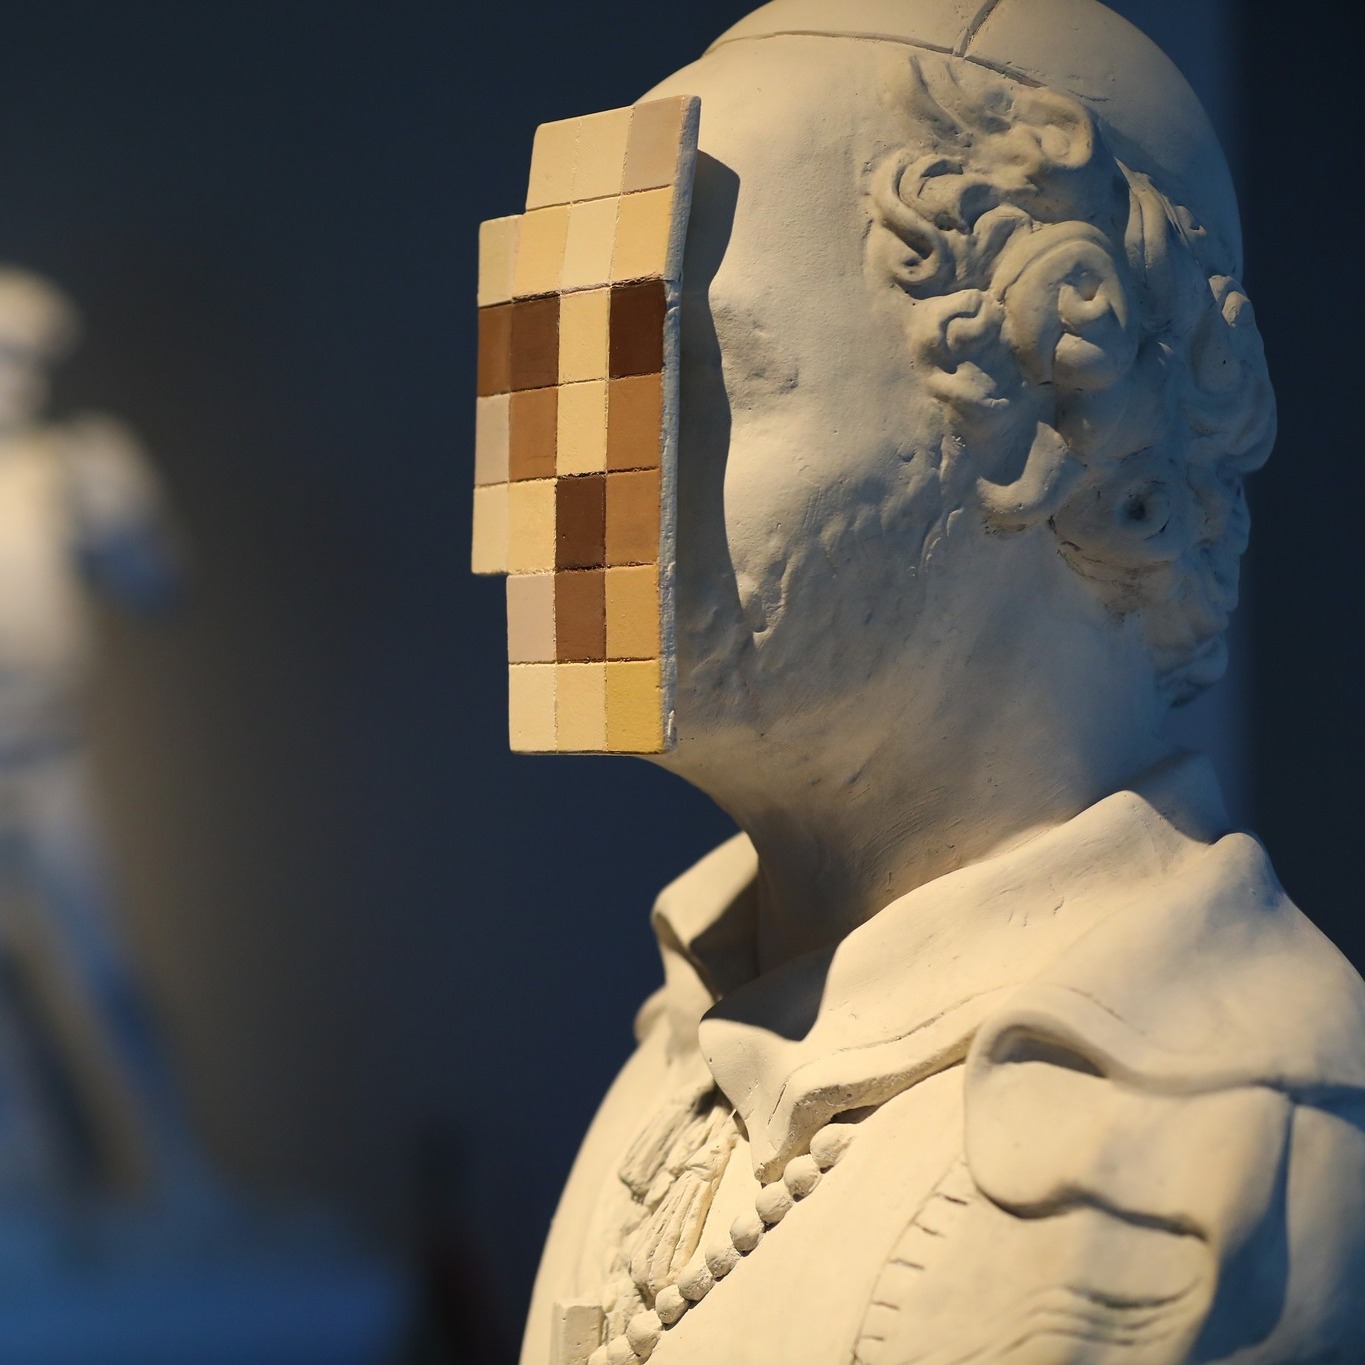 Banksy's sculpture Cardinal Sin, an 18-century stone bust of a priest with its face sawn off and replaced by pixelated tiles.